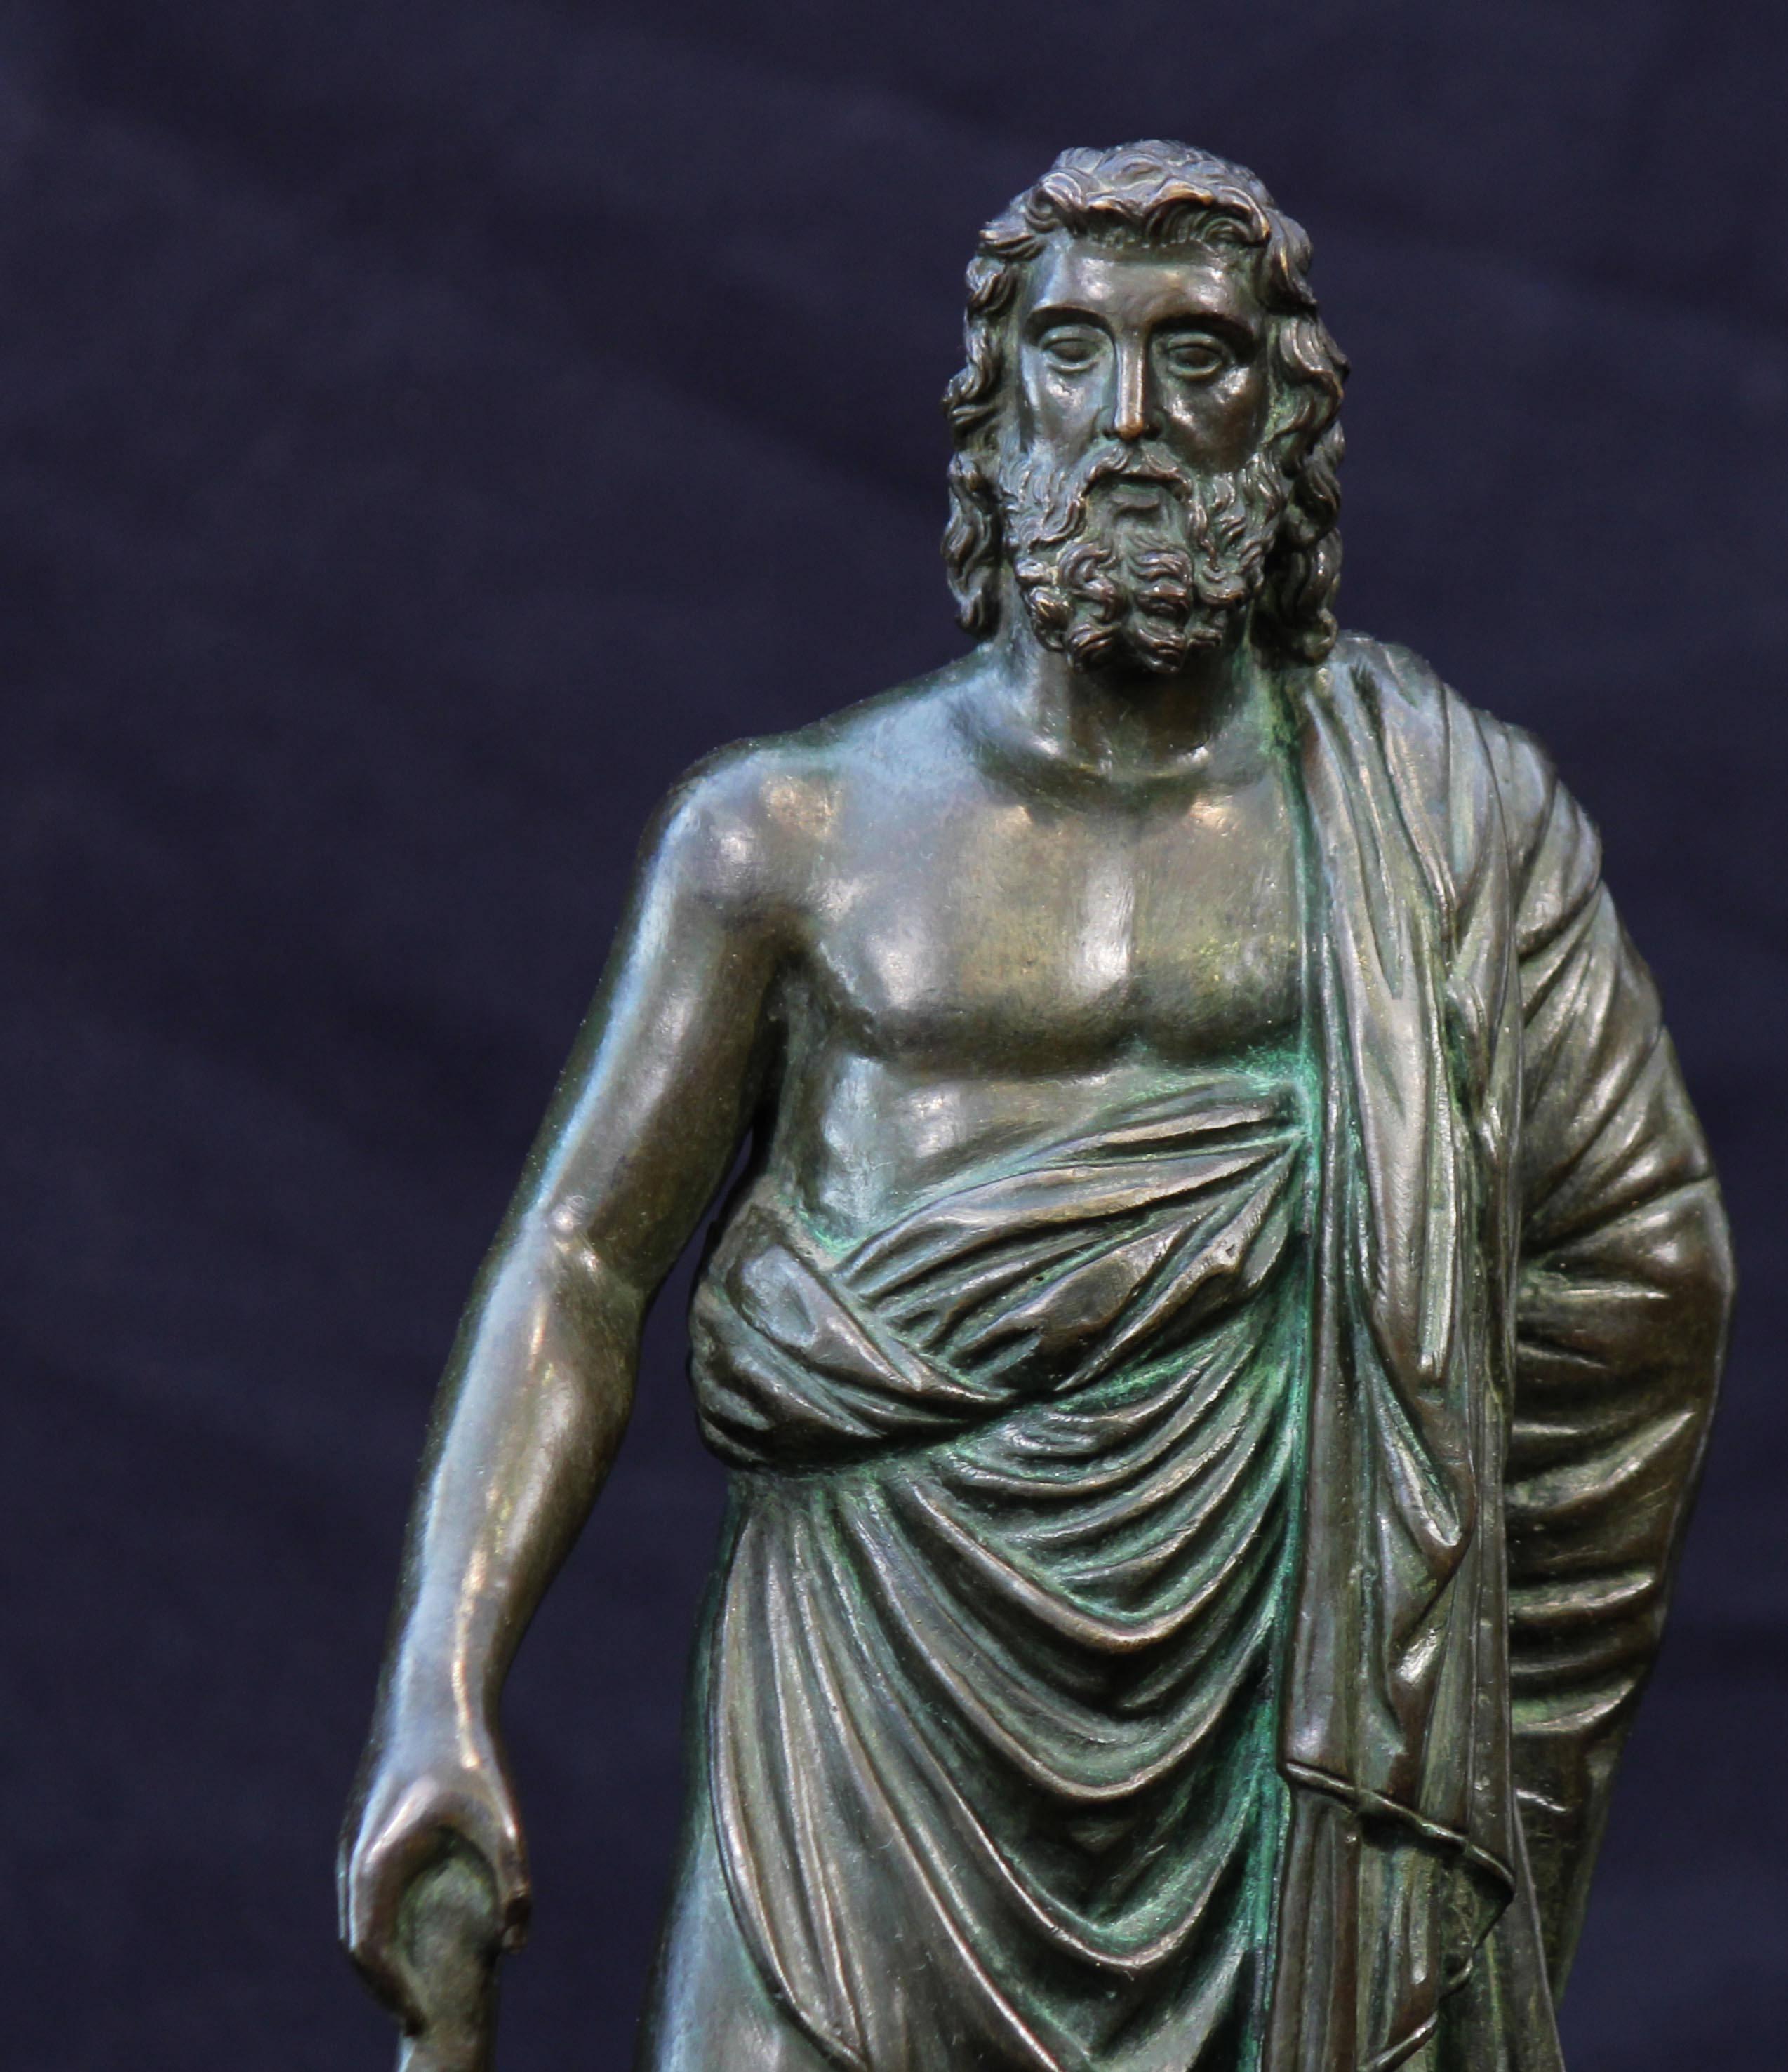 Fine antique patinated bronze sculpture of Asclepius Greek god of medicine. Mounted on slate base, early 20th century.